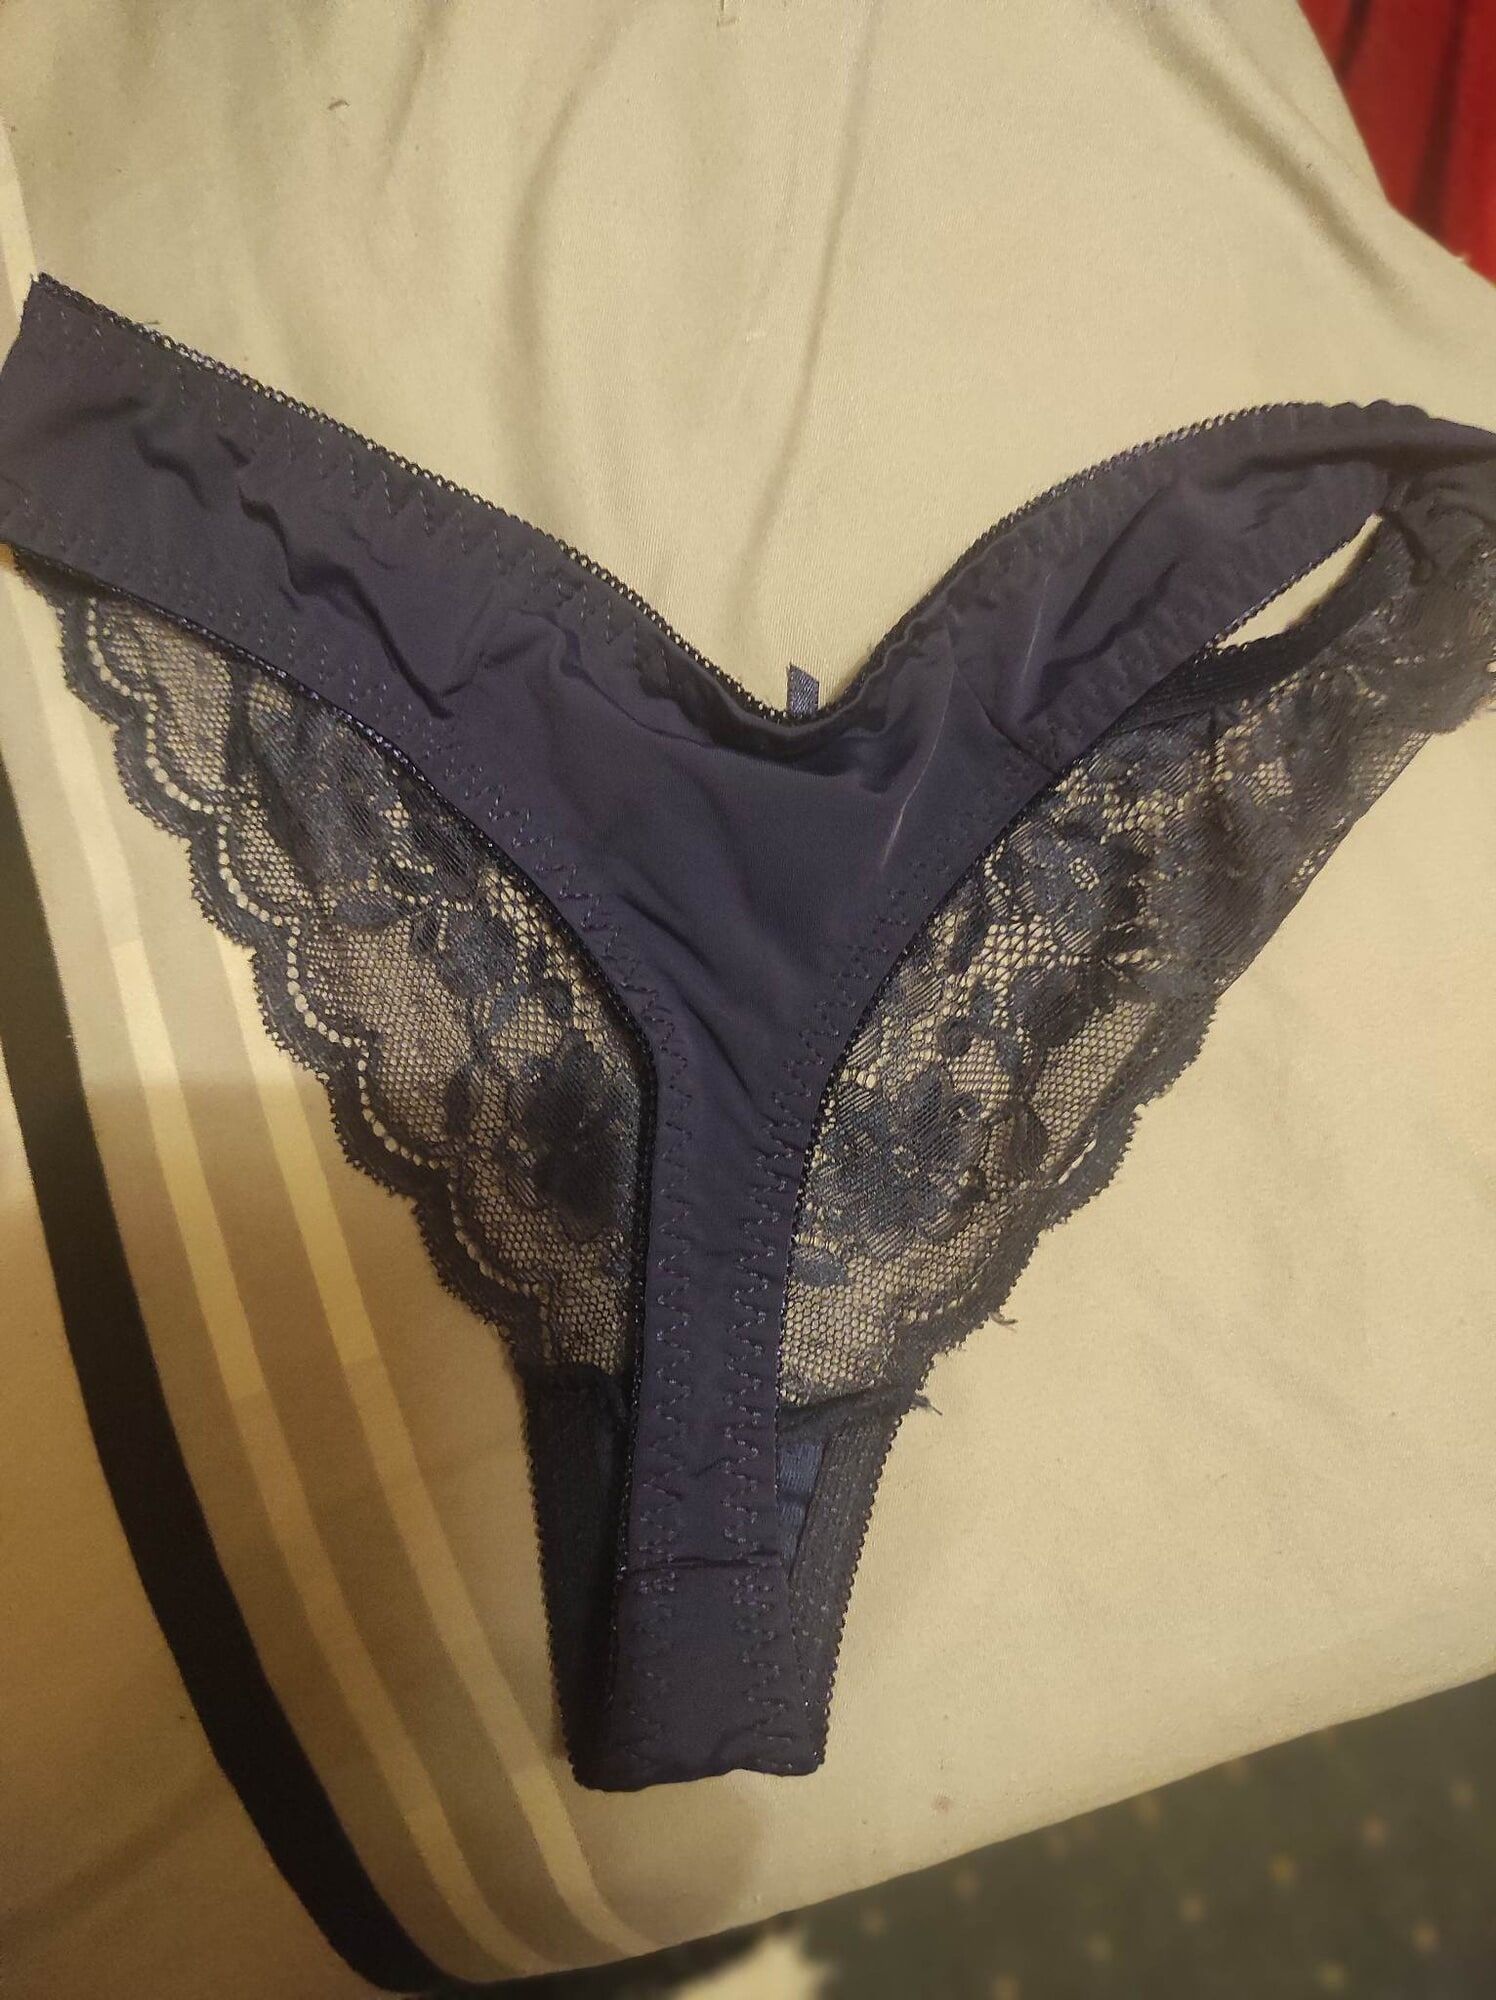 my friend's daughter is a thong 